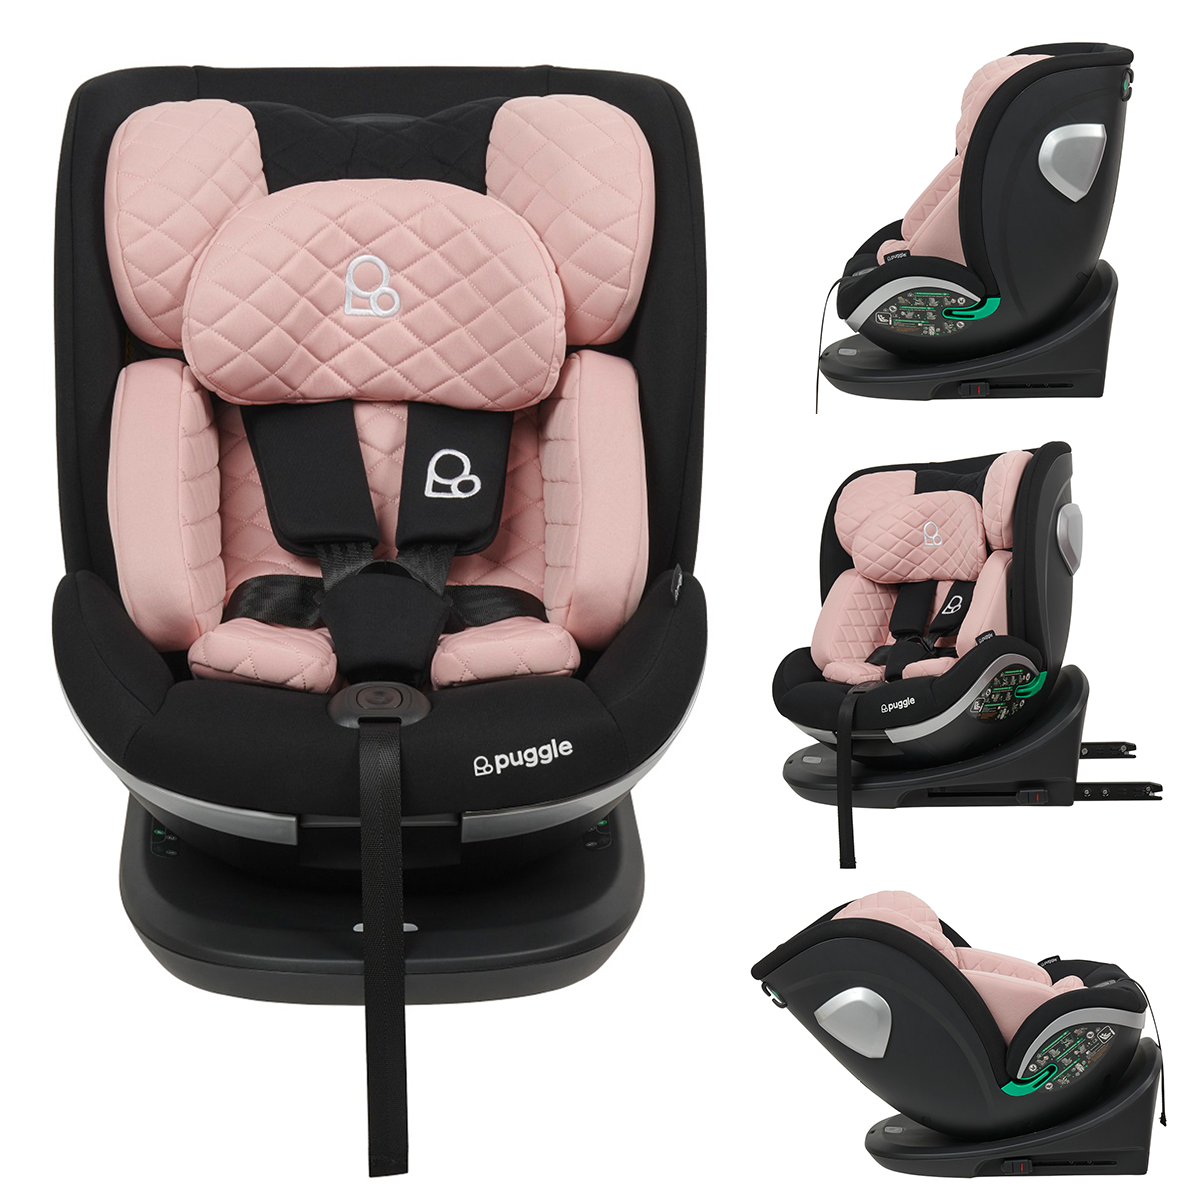 Puggle i-Size Safe Max Luxe Group 0+123 360° Rotate Car Seat - Blush Pink